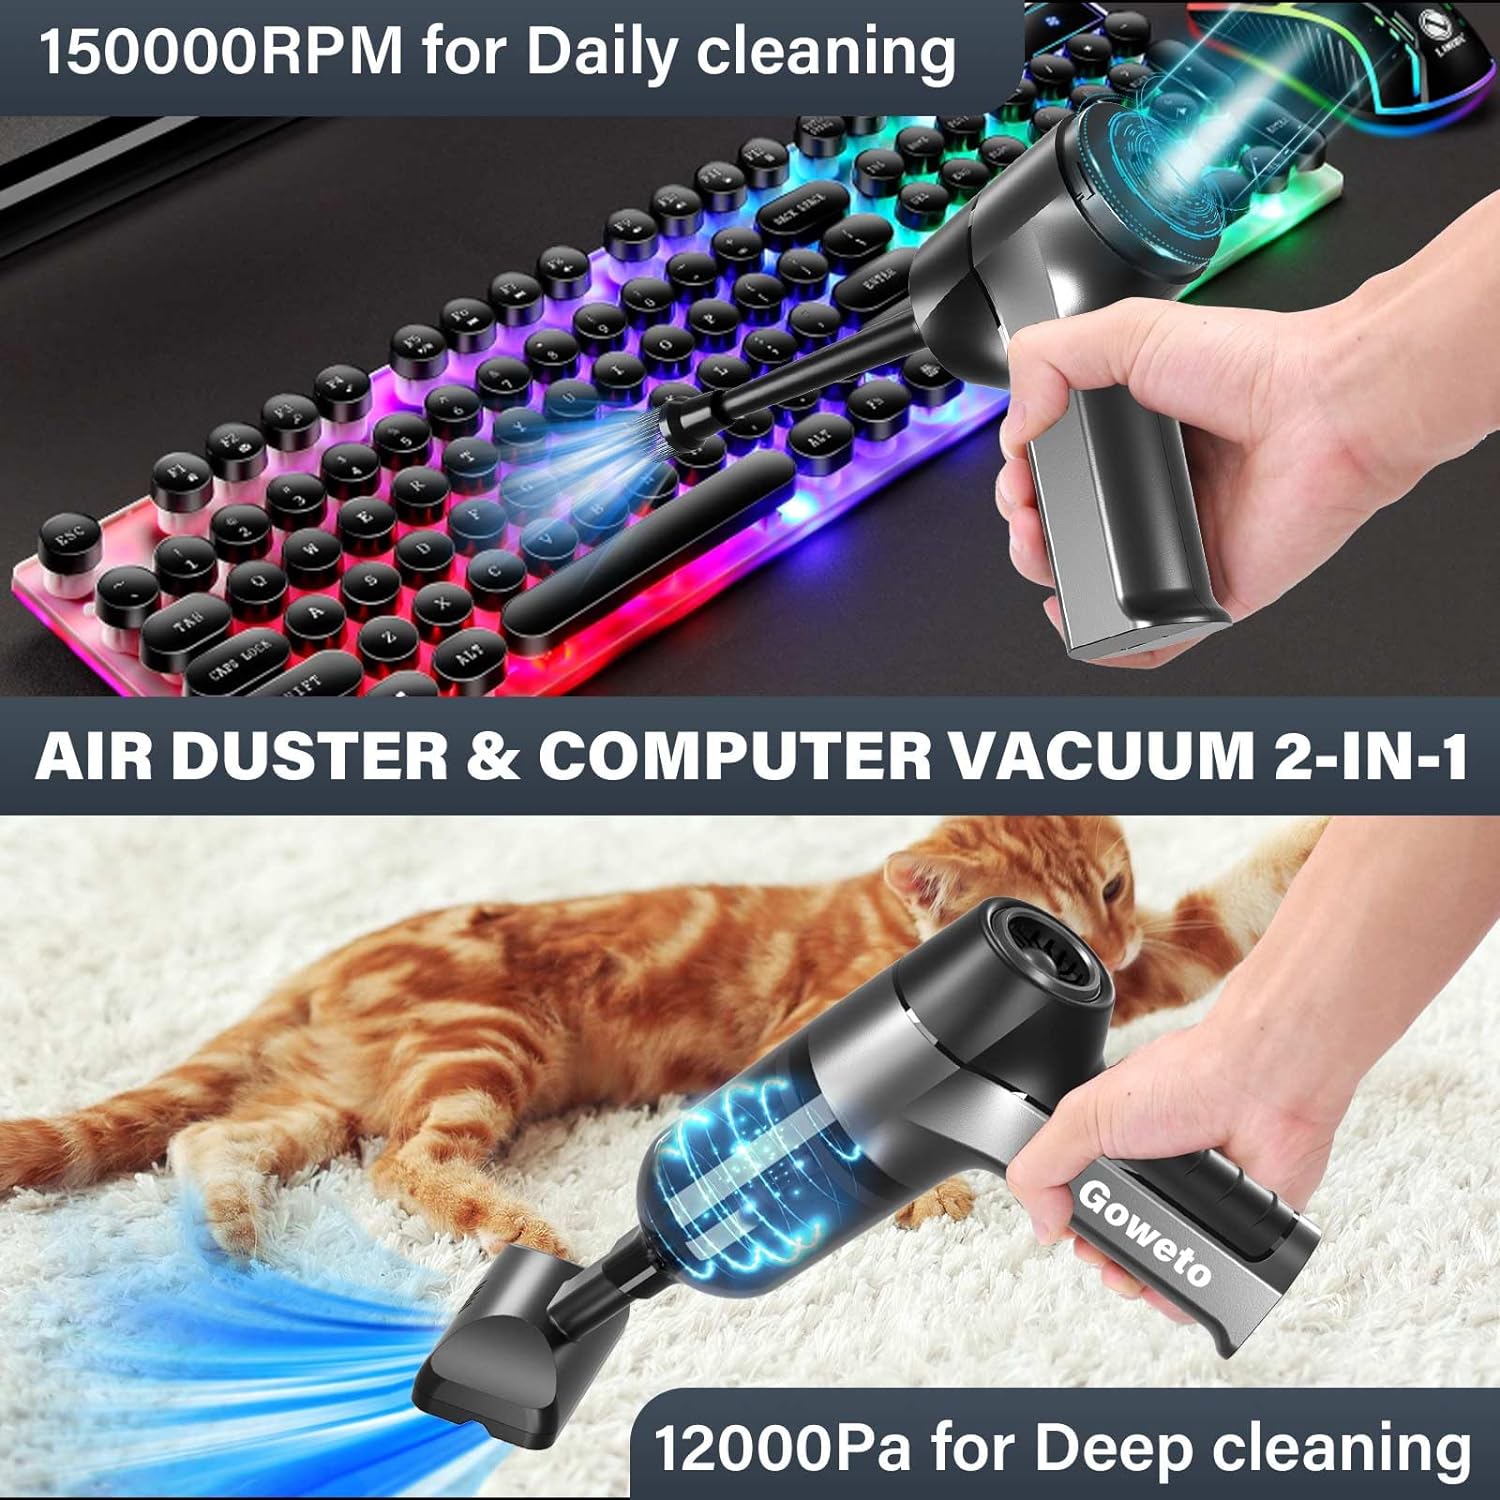 Goweto Computer Vacuum - Air Duster - 3 in 1-150000RPM Brushless Motor - 8 Different Nozzles